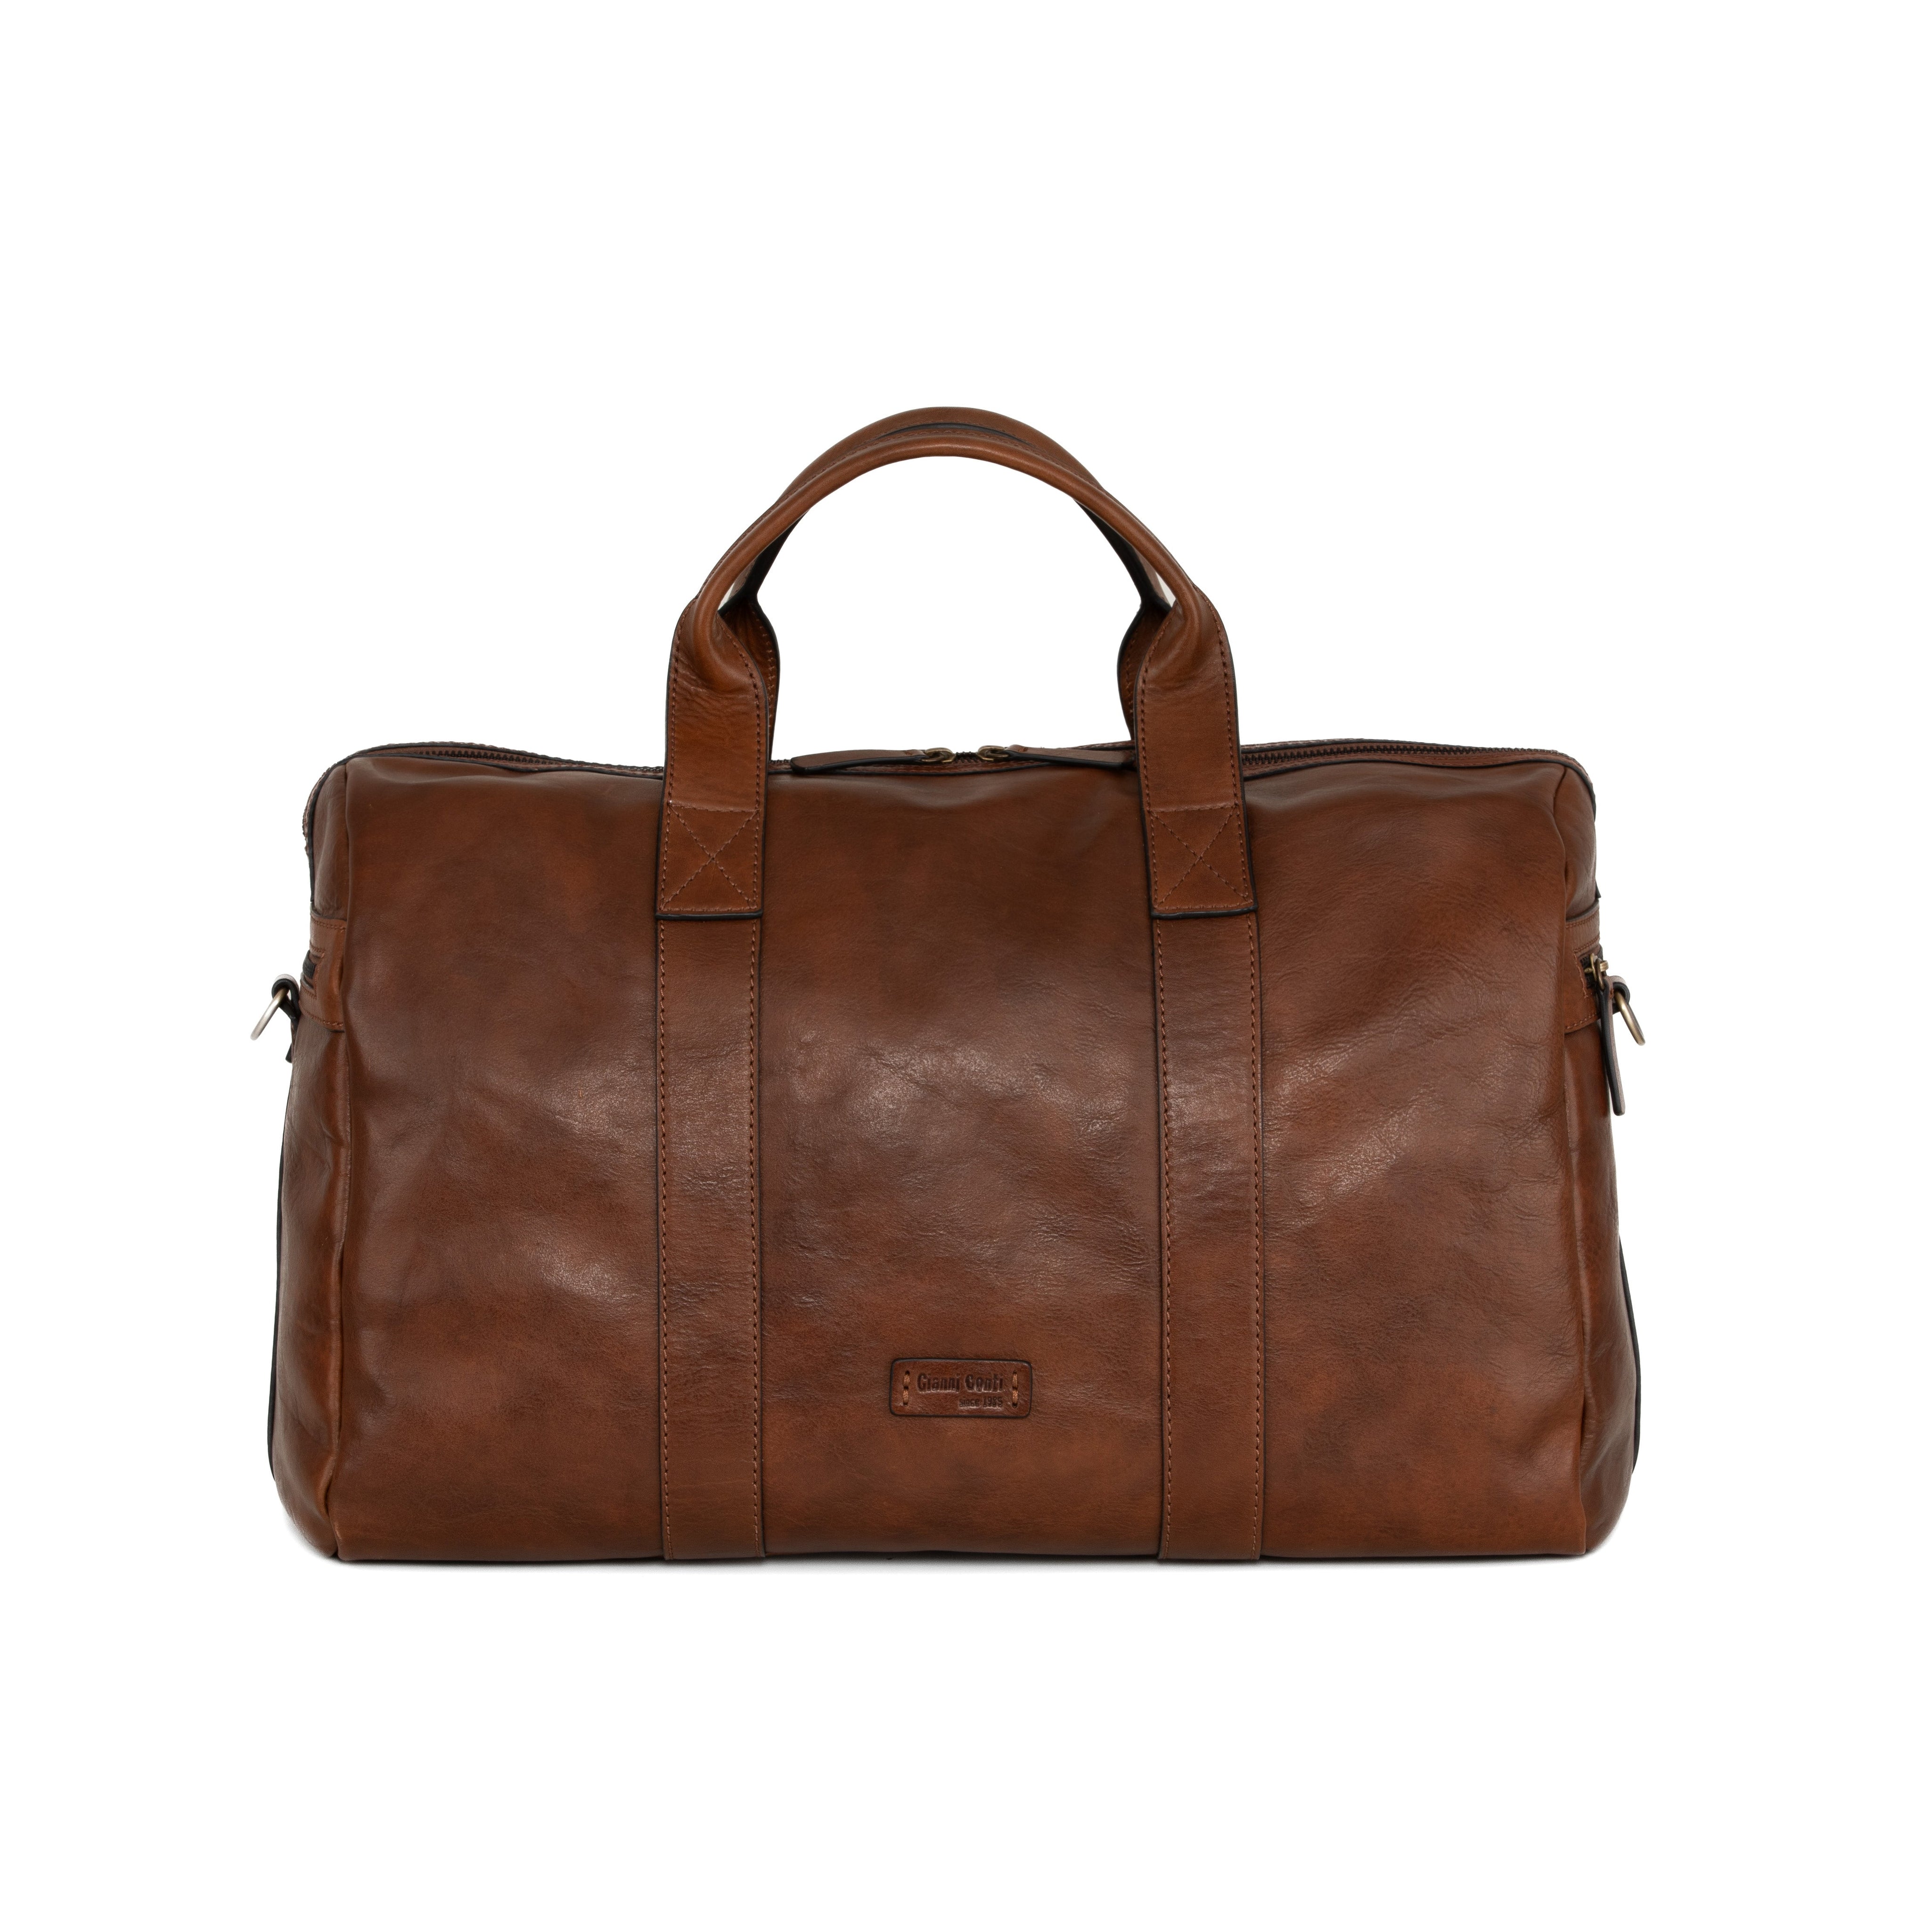 Gianni Conti FABRIZIO Vegetable-Tanned Leather Travel Bag